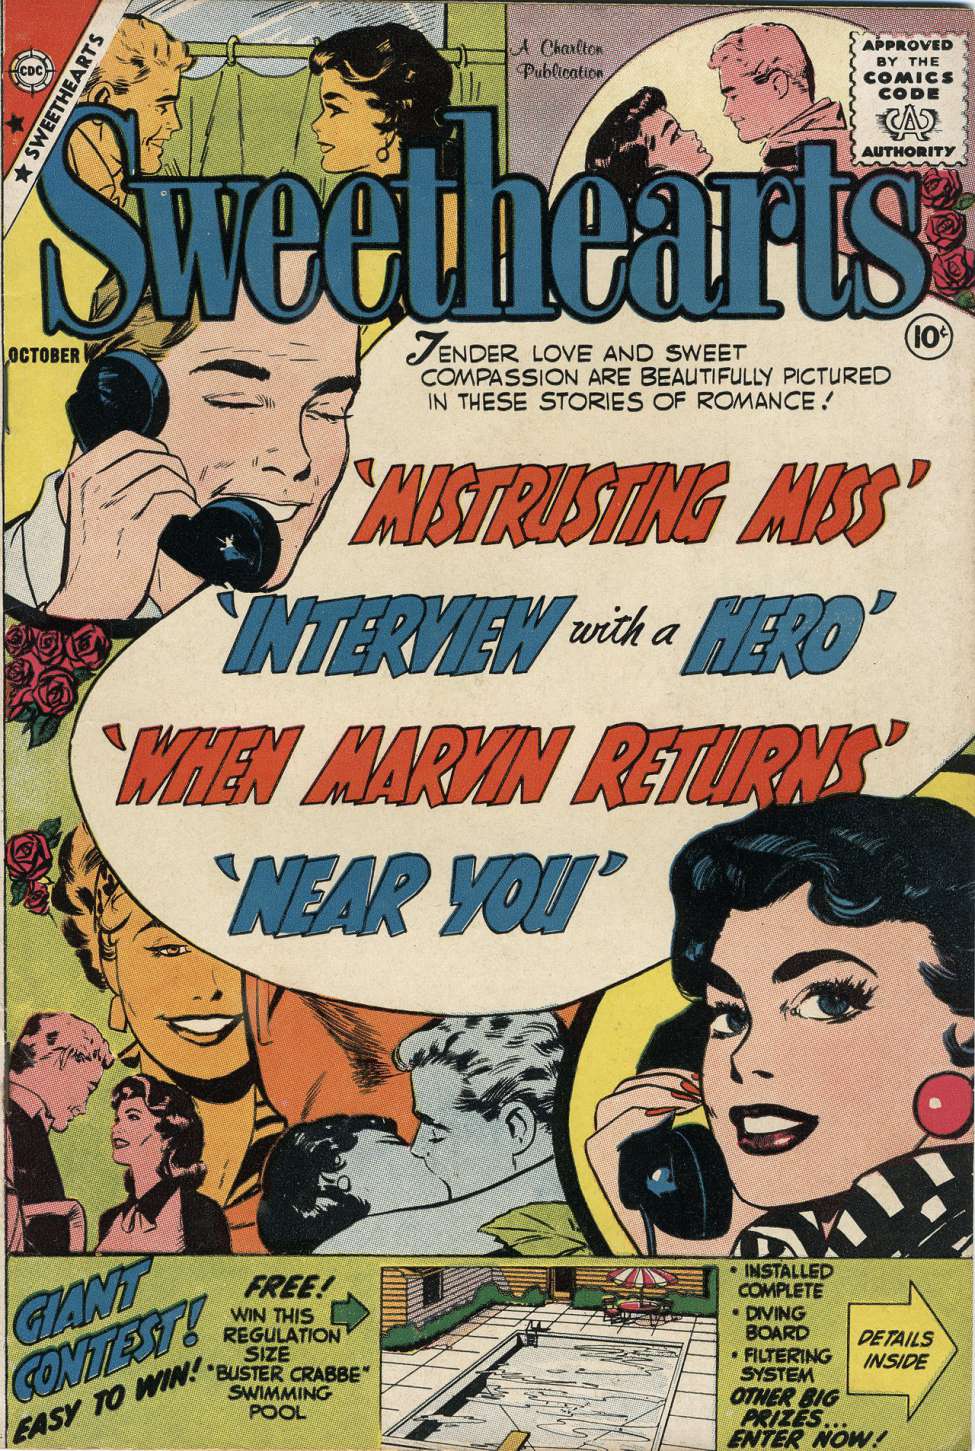 Book Cover For Sweethearts 50